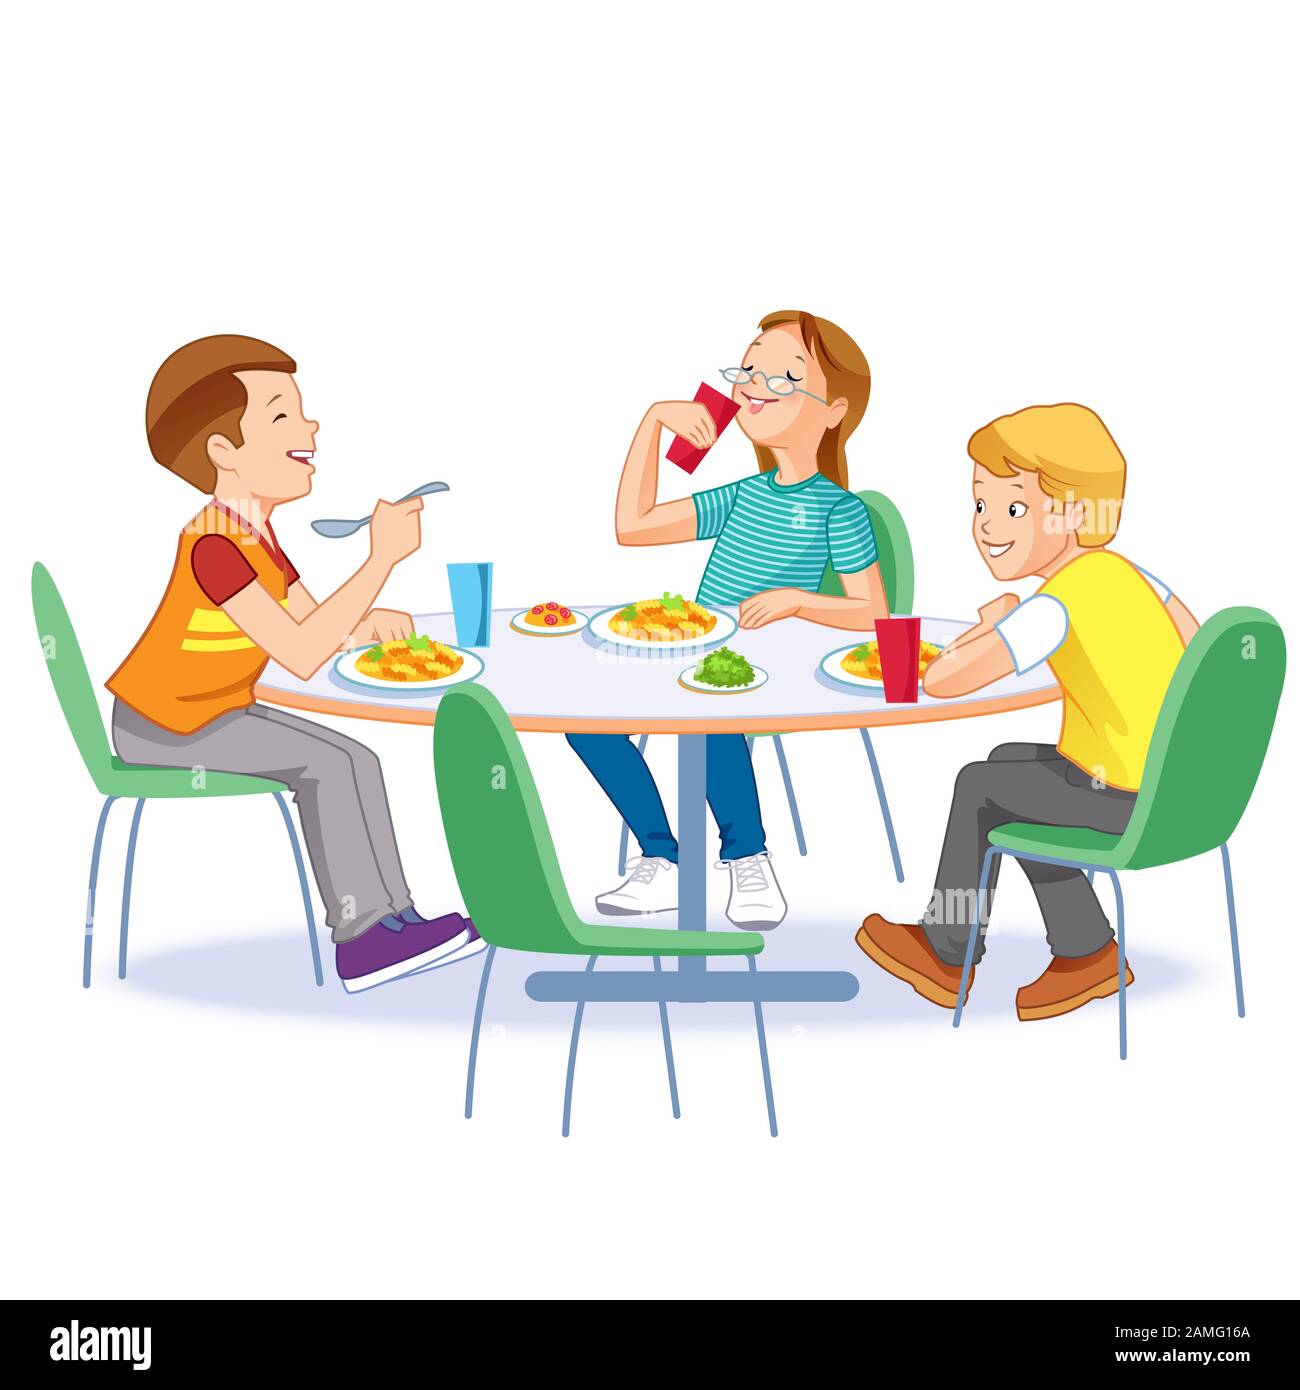 Happy kids having lunch by themselves. Two boys and girl eating lunch meals at table. Child nutrition concept. Stock Vector